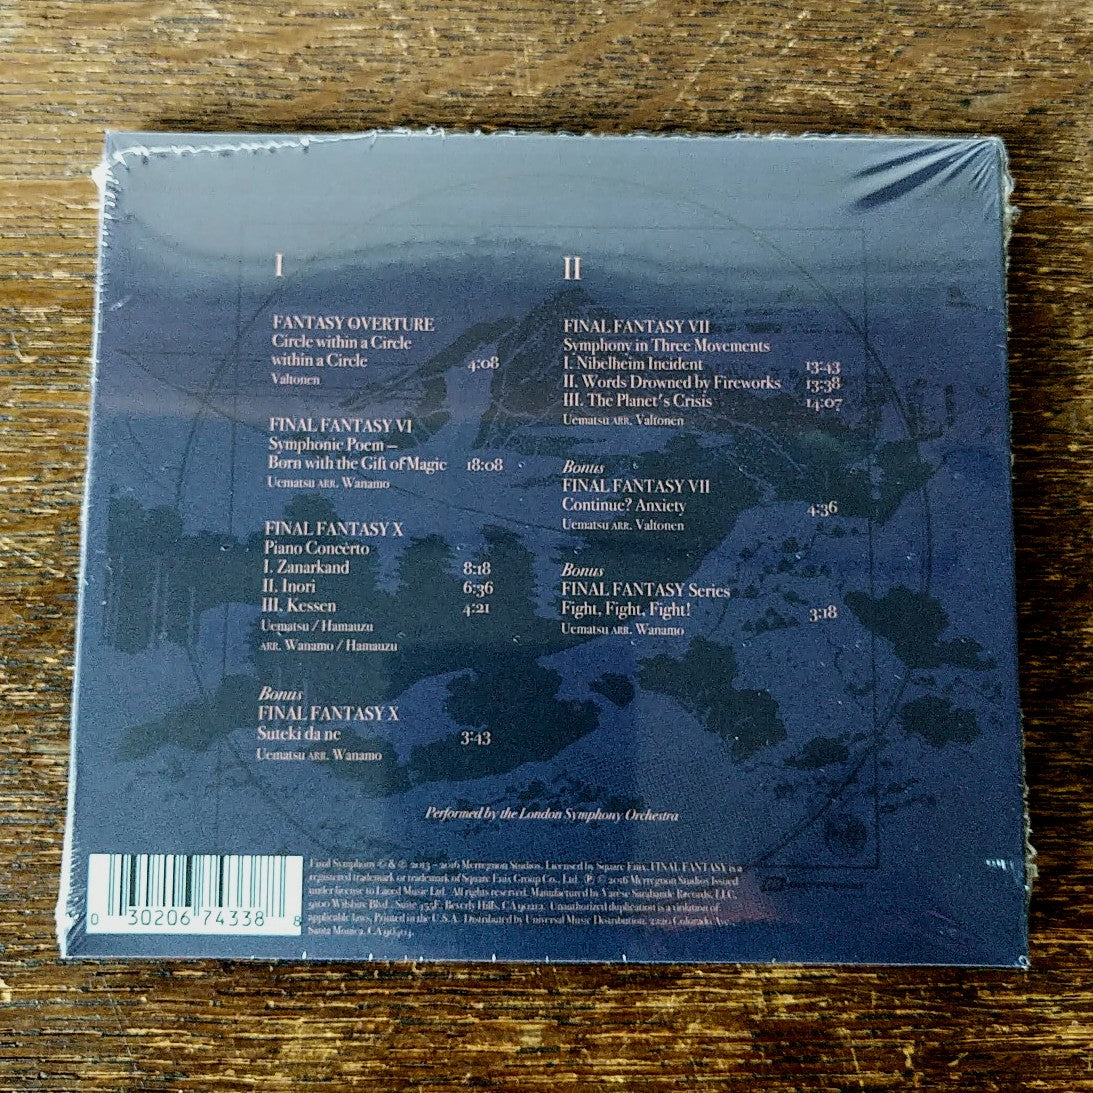 [SOLD OUT] FINAL SYMPHONY "Music from Final Fantasy VI, VII and X" 2xCD